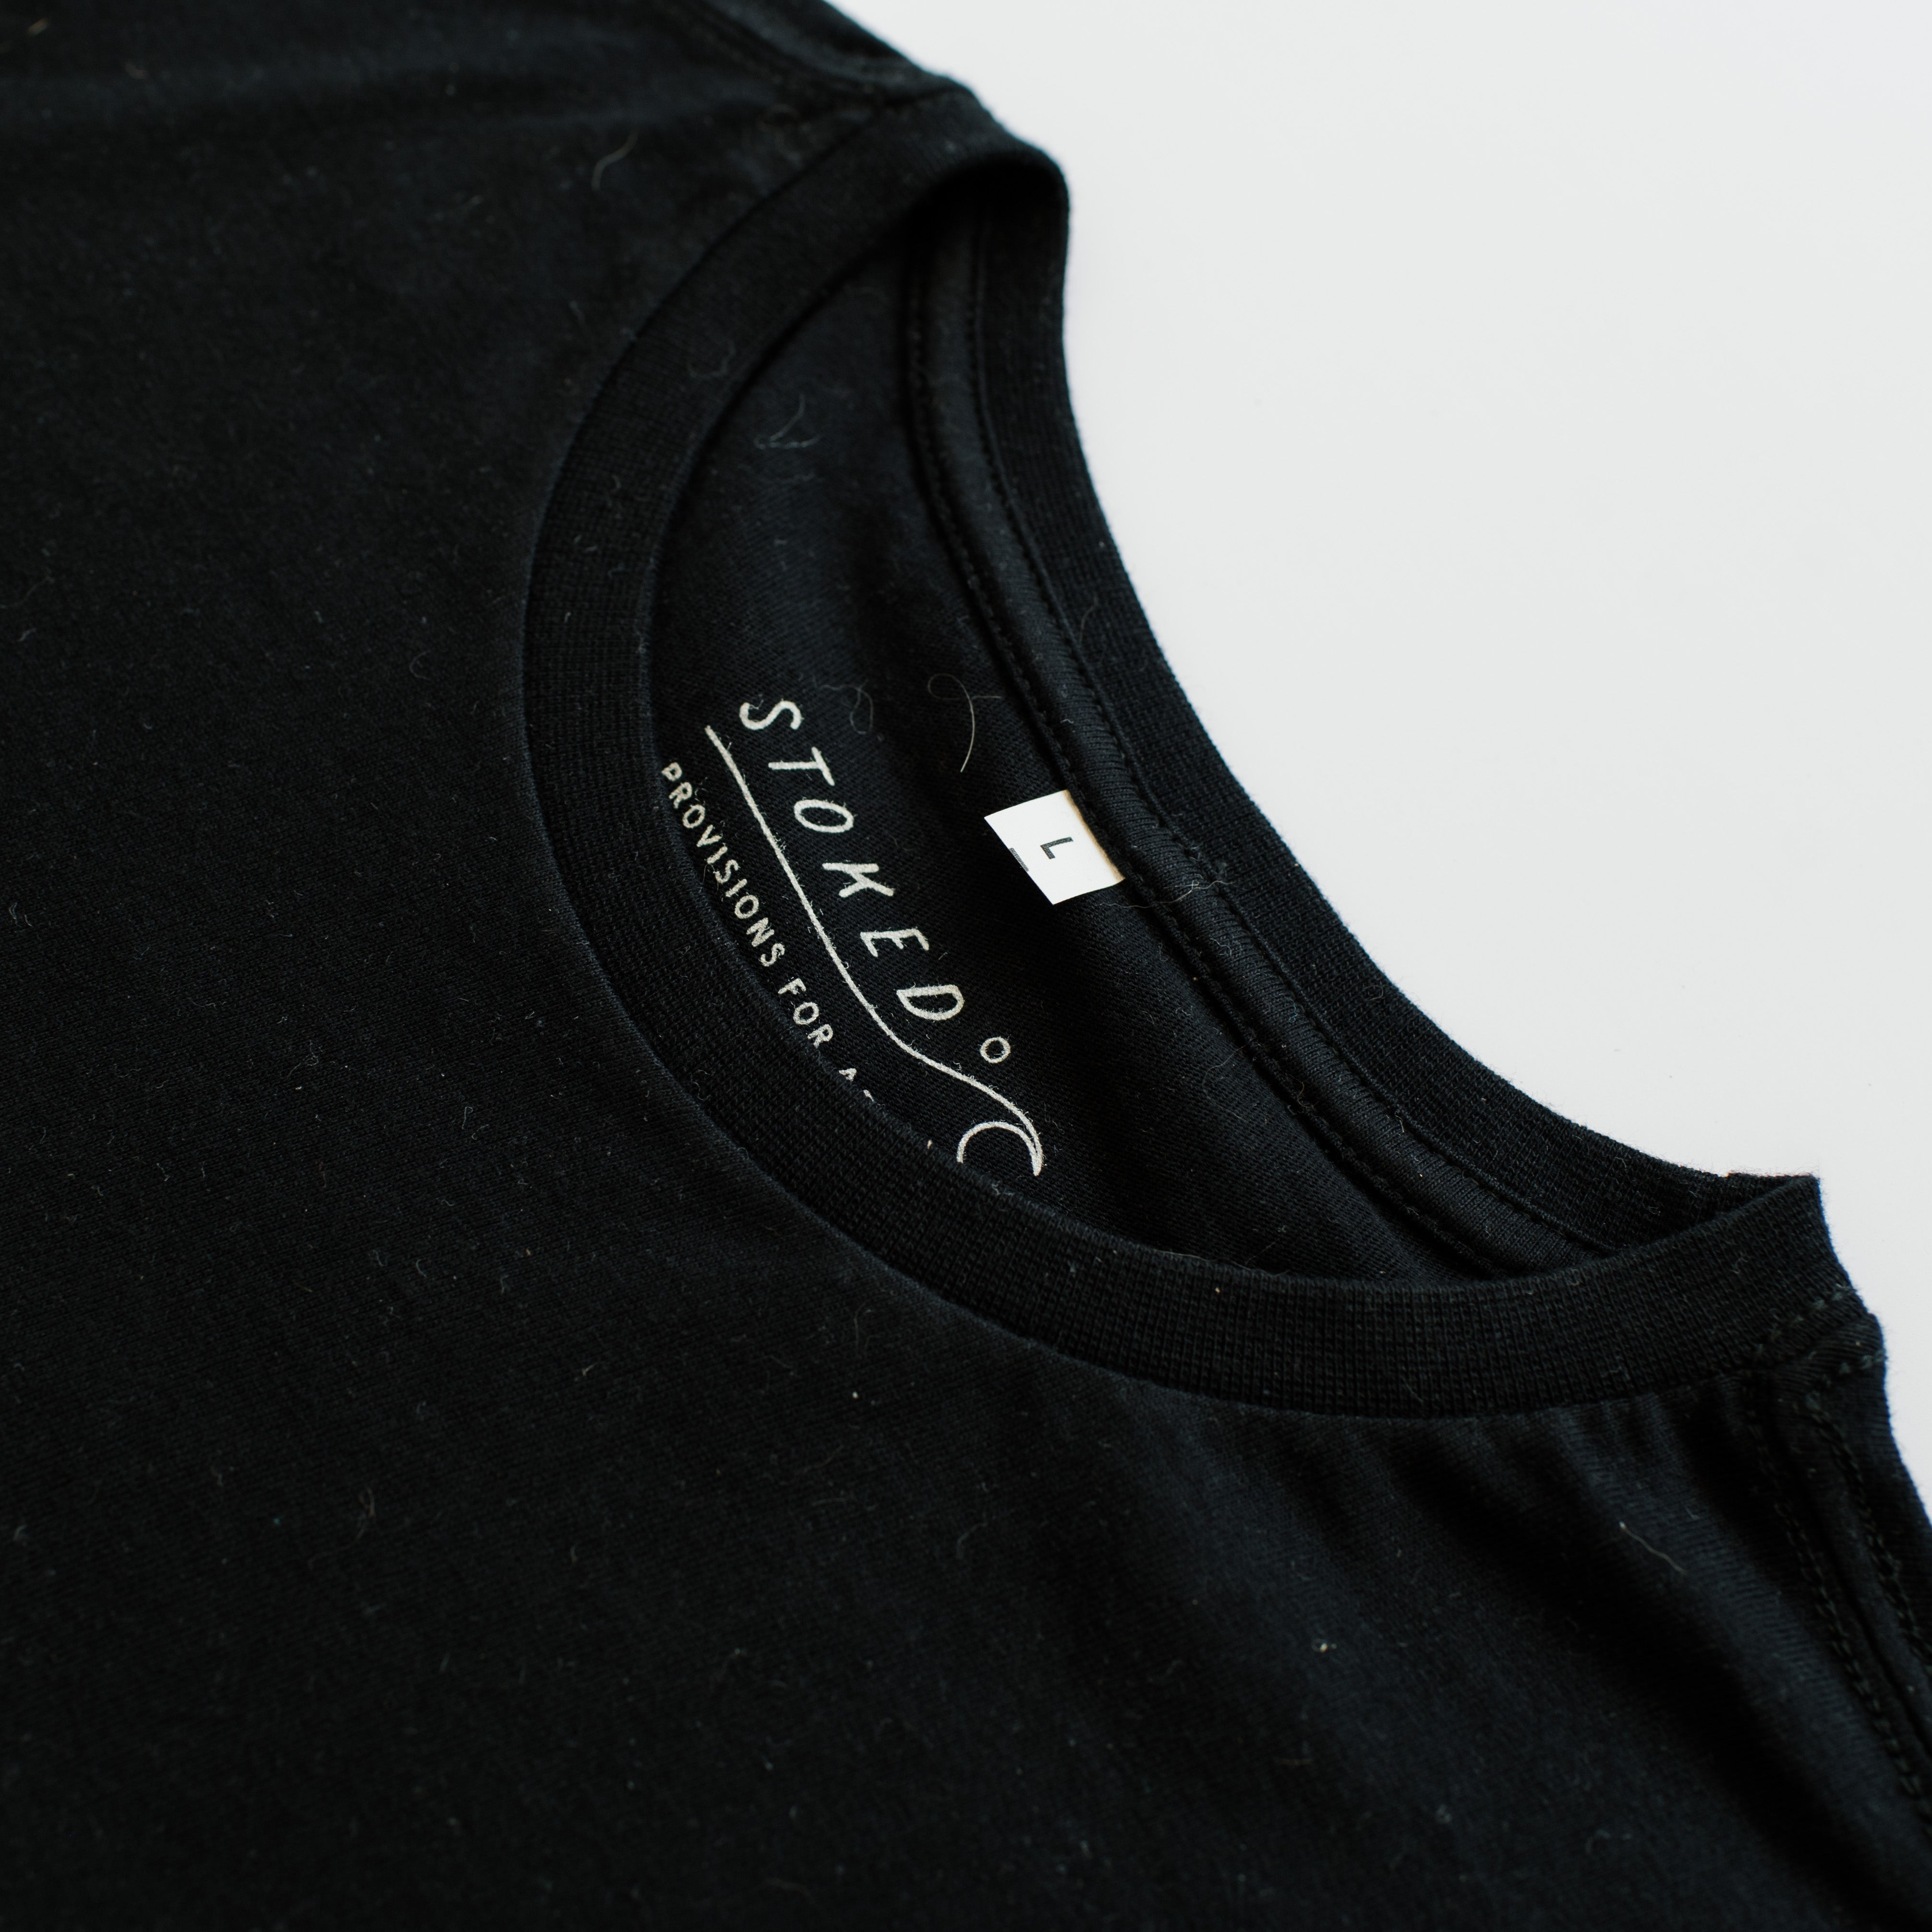 Black Pocket Stoked Folks T-Shirt - Stokedthebrand. Lifestyle products for outdoor adventures. Made in South Africa